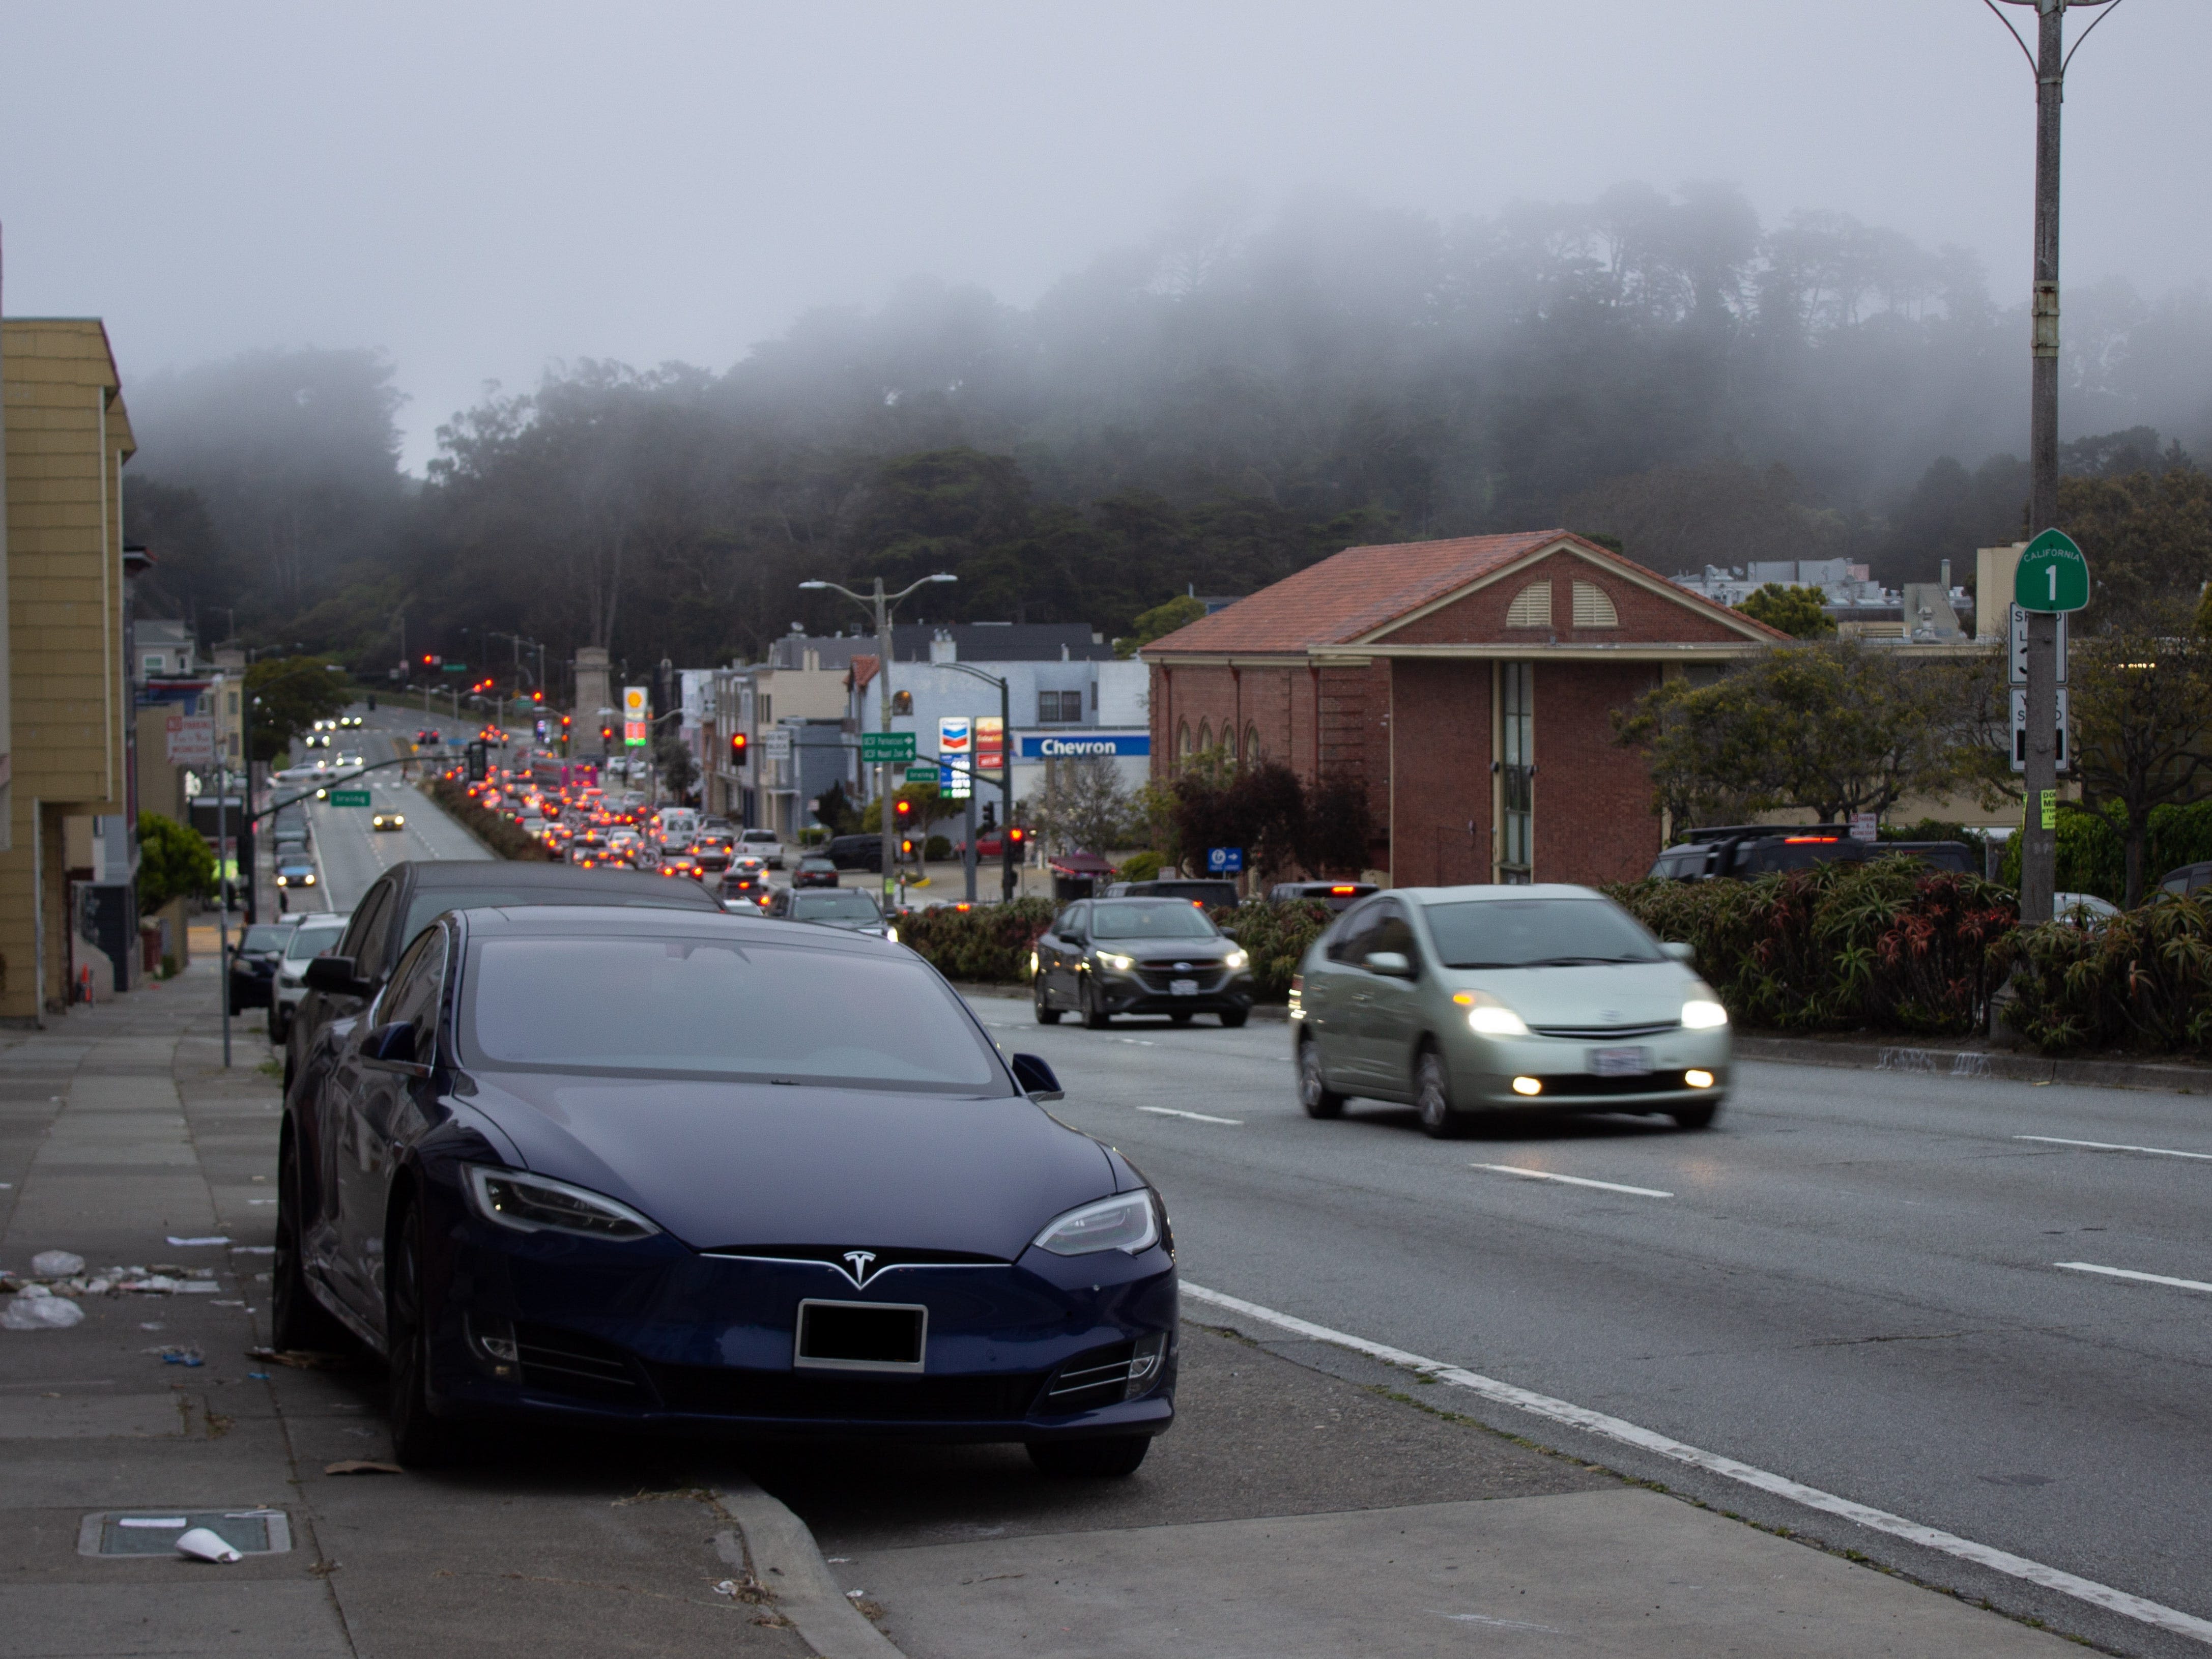 These are the kinds of San Francisco roads Tesla's FSD had a hard time dealing with, report says